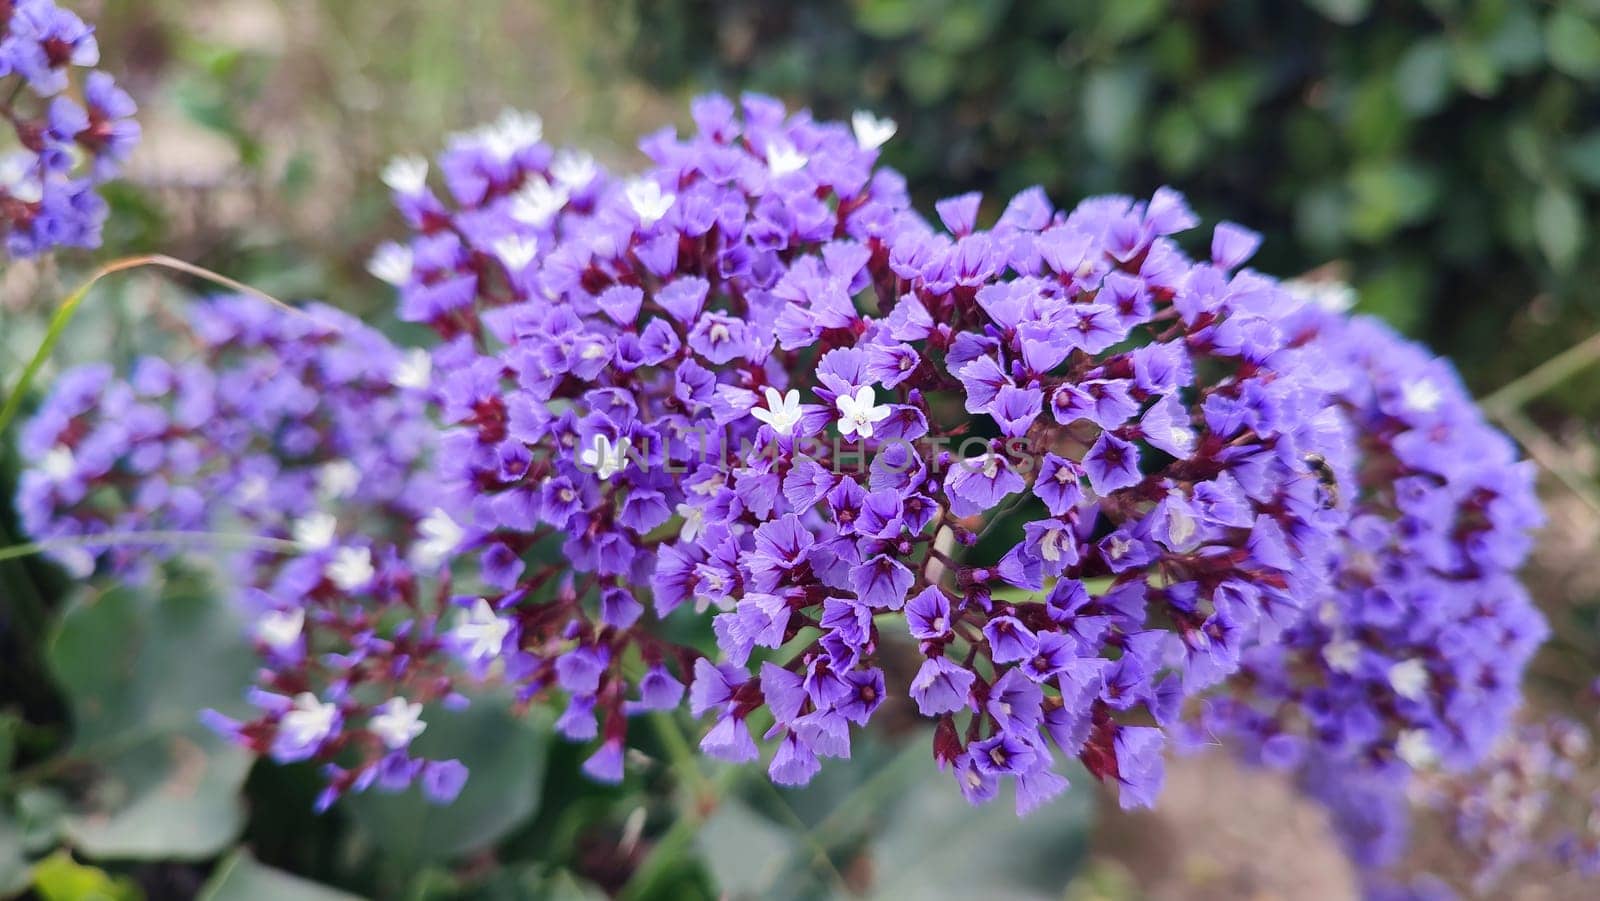 purple decorative flowers in the flowerbed, nature, spring, summer, botany. High quality photo